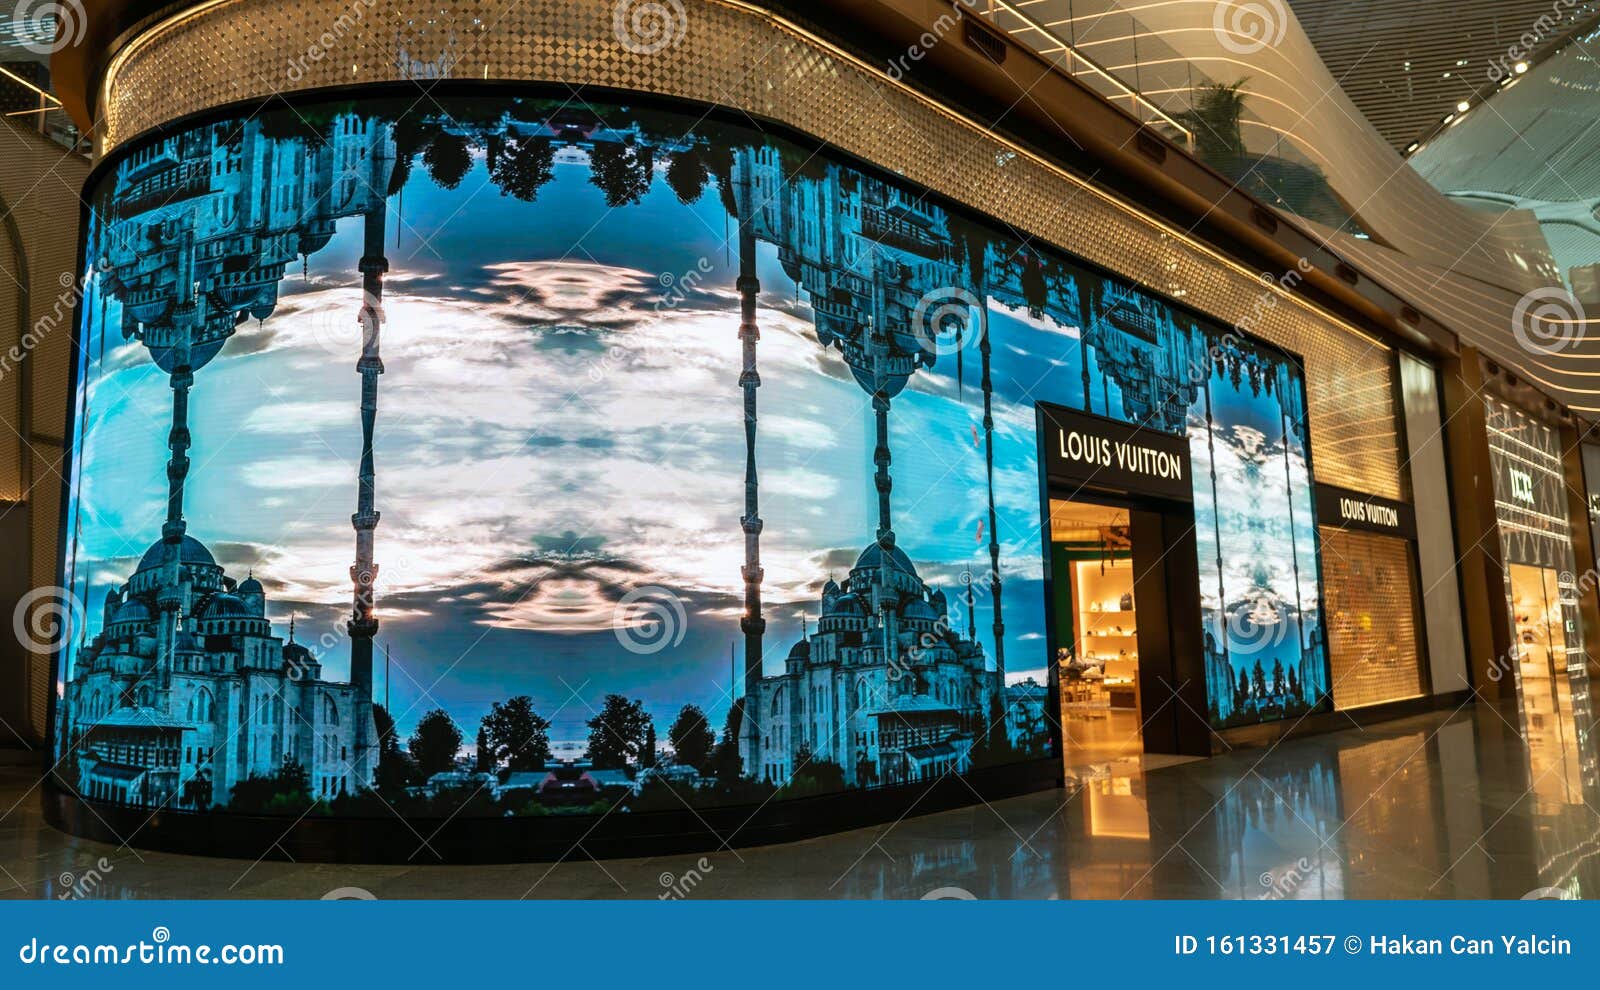 Huge Digital Screens of Louis Vuitton Store Inside Istanbul Airport Boarding Area, Istanbul, Turkey Editorial Photography - Image lounge, flight: 161331457